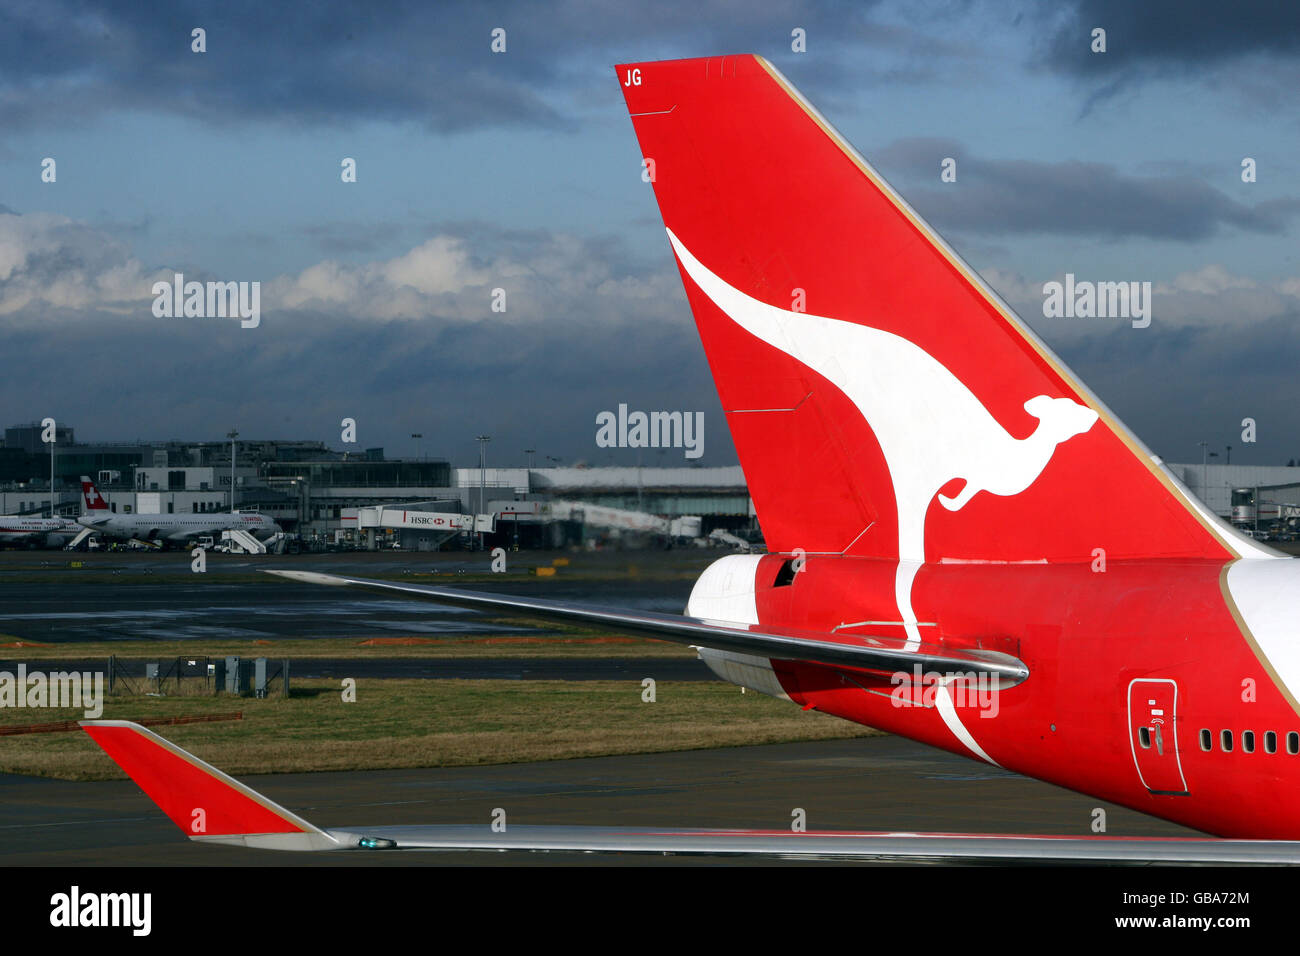 A Qantas plane sits at Terminal 4 of Heathrow Airport as a giant new airline could be formed following news that British Airways is in talks about a possible merger with the Australian carrier. Stock Photo